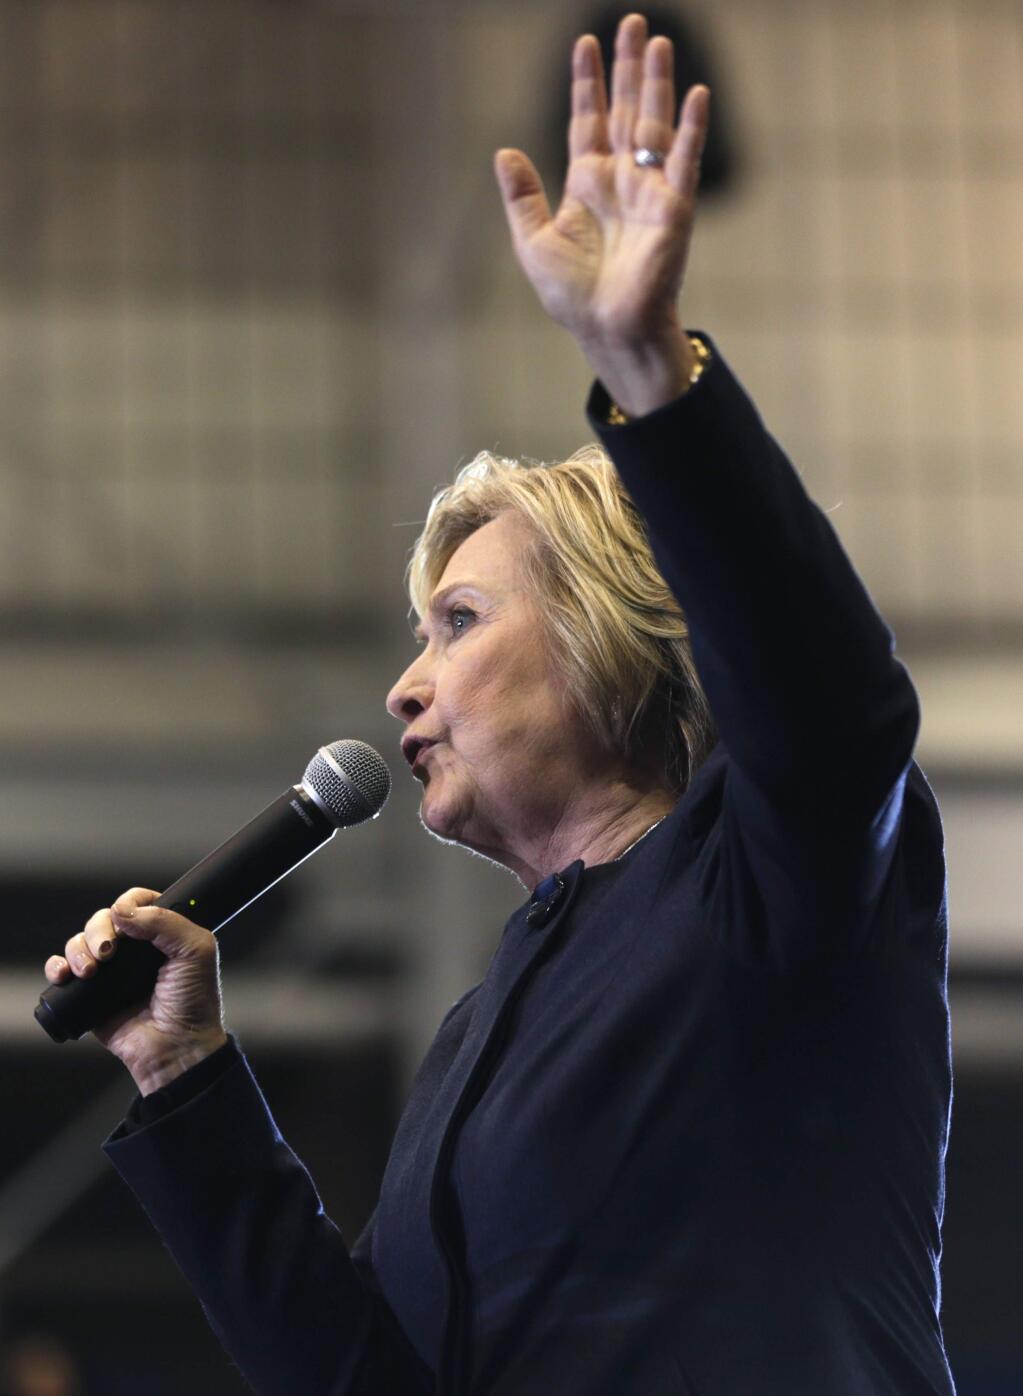 Democratic presidential candidate Hillary Clinton speaks during a rally at Cohoes High School on Monday, April 4, 2016, in Cohoes, N.Y. (AP Photo/Mike Groll)